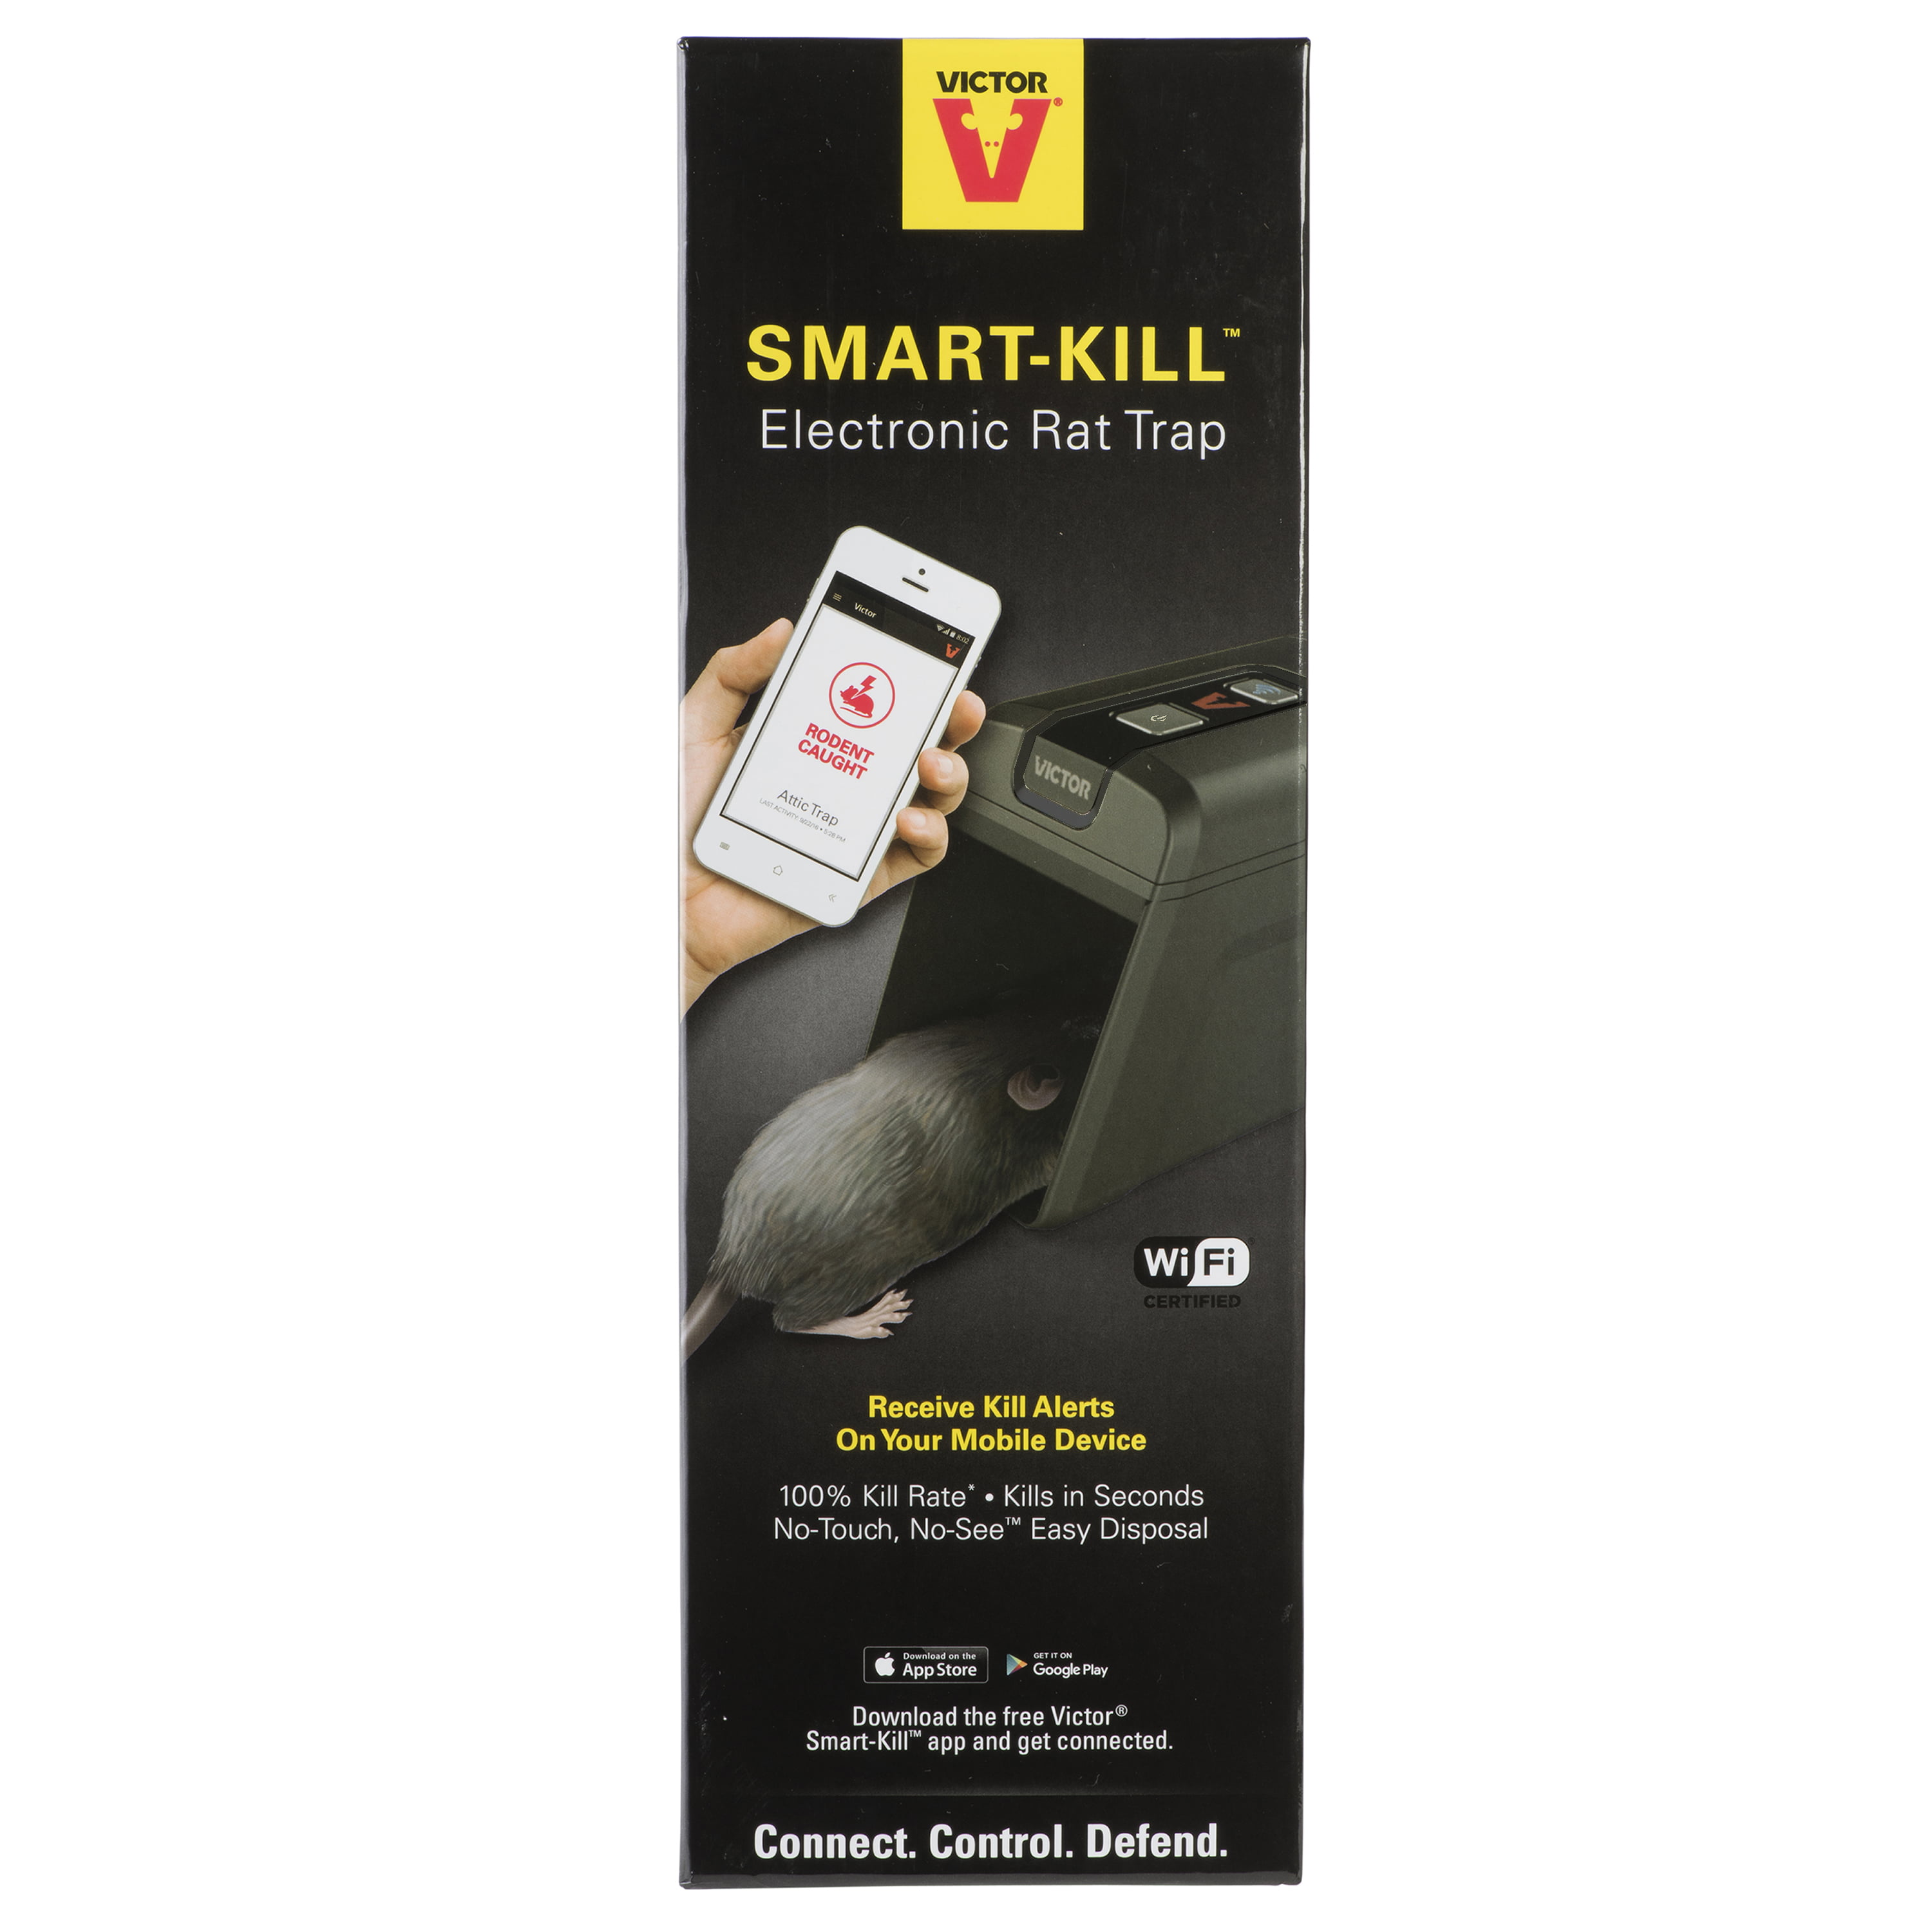 App Analysis: Victor Smart-Kill Mouse Trap